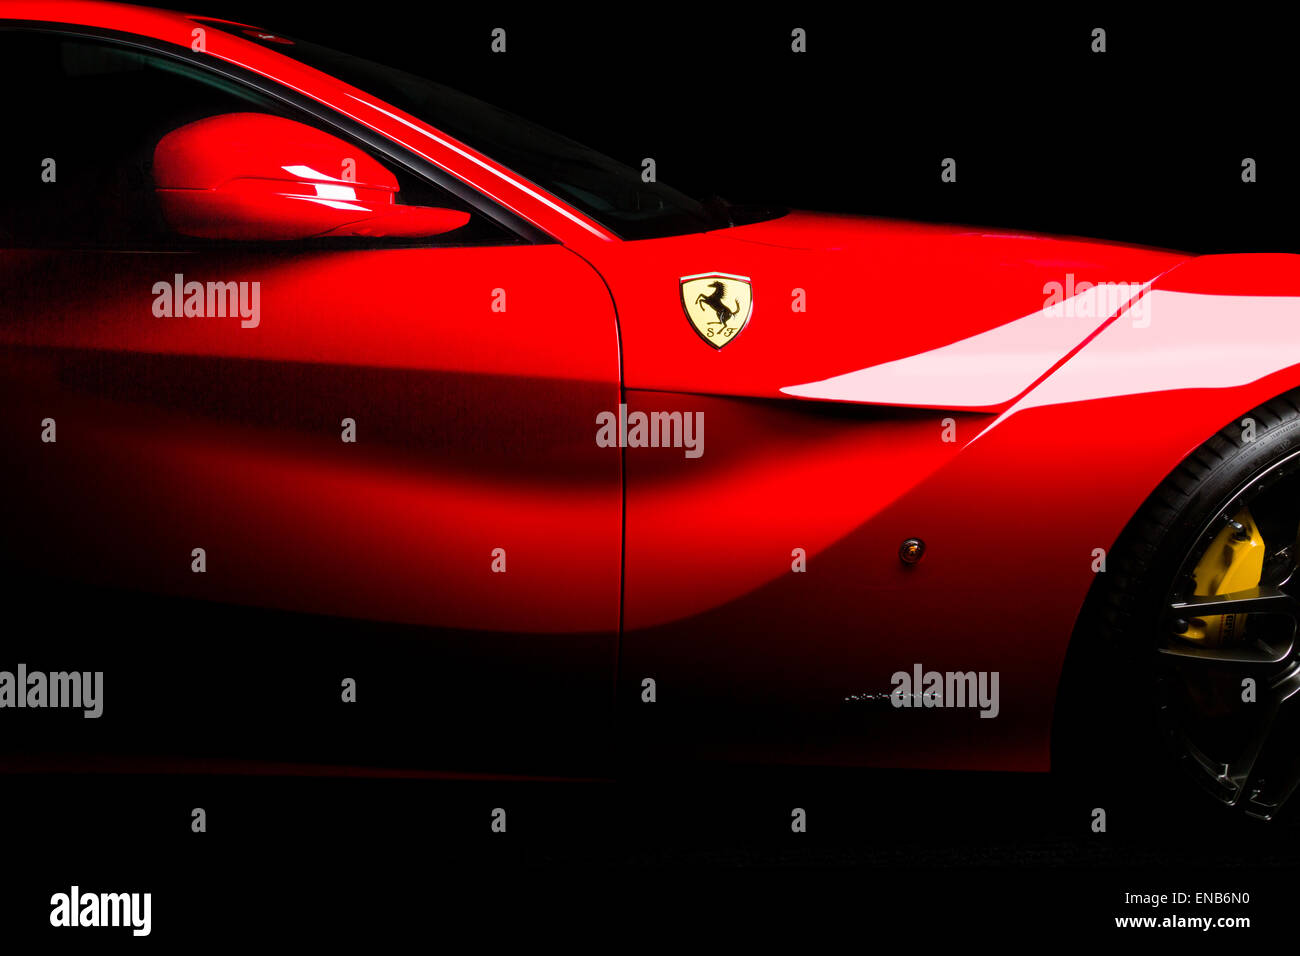 Ferrari F12 in red side shot of vent, mirrors and logo on a black background. Stock Photo